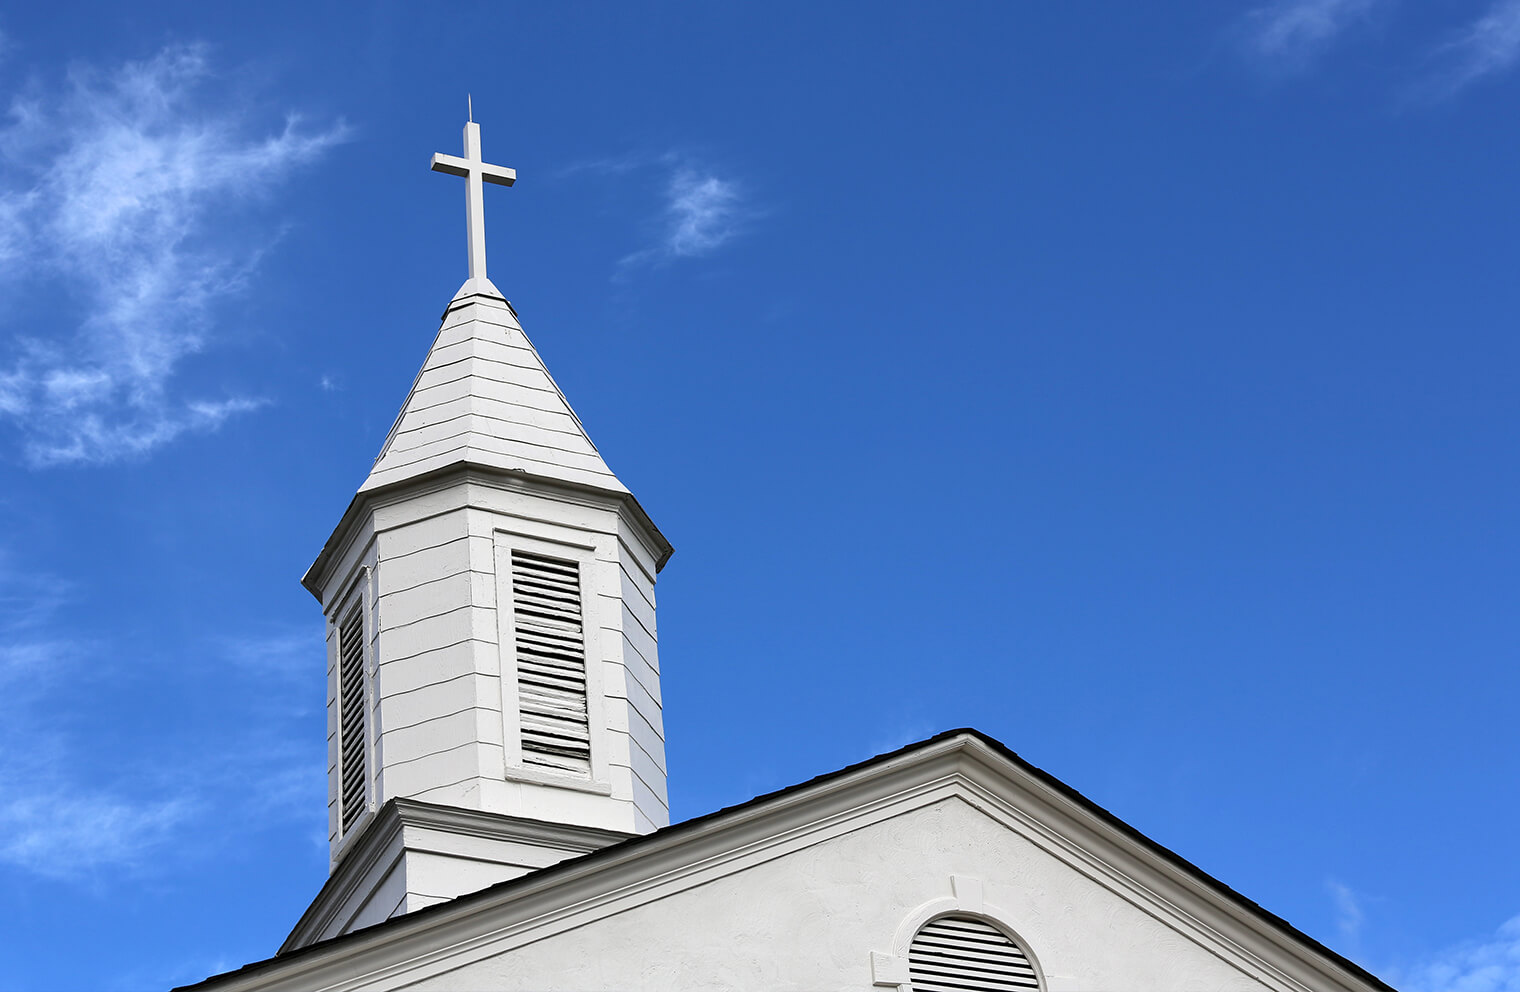 Image of a white wooden steeple with a blue sky in the background.